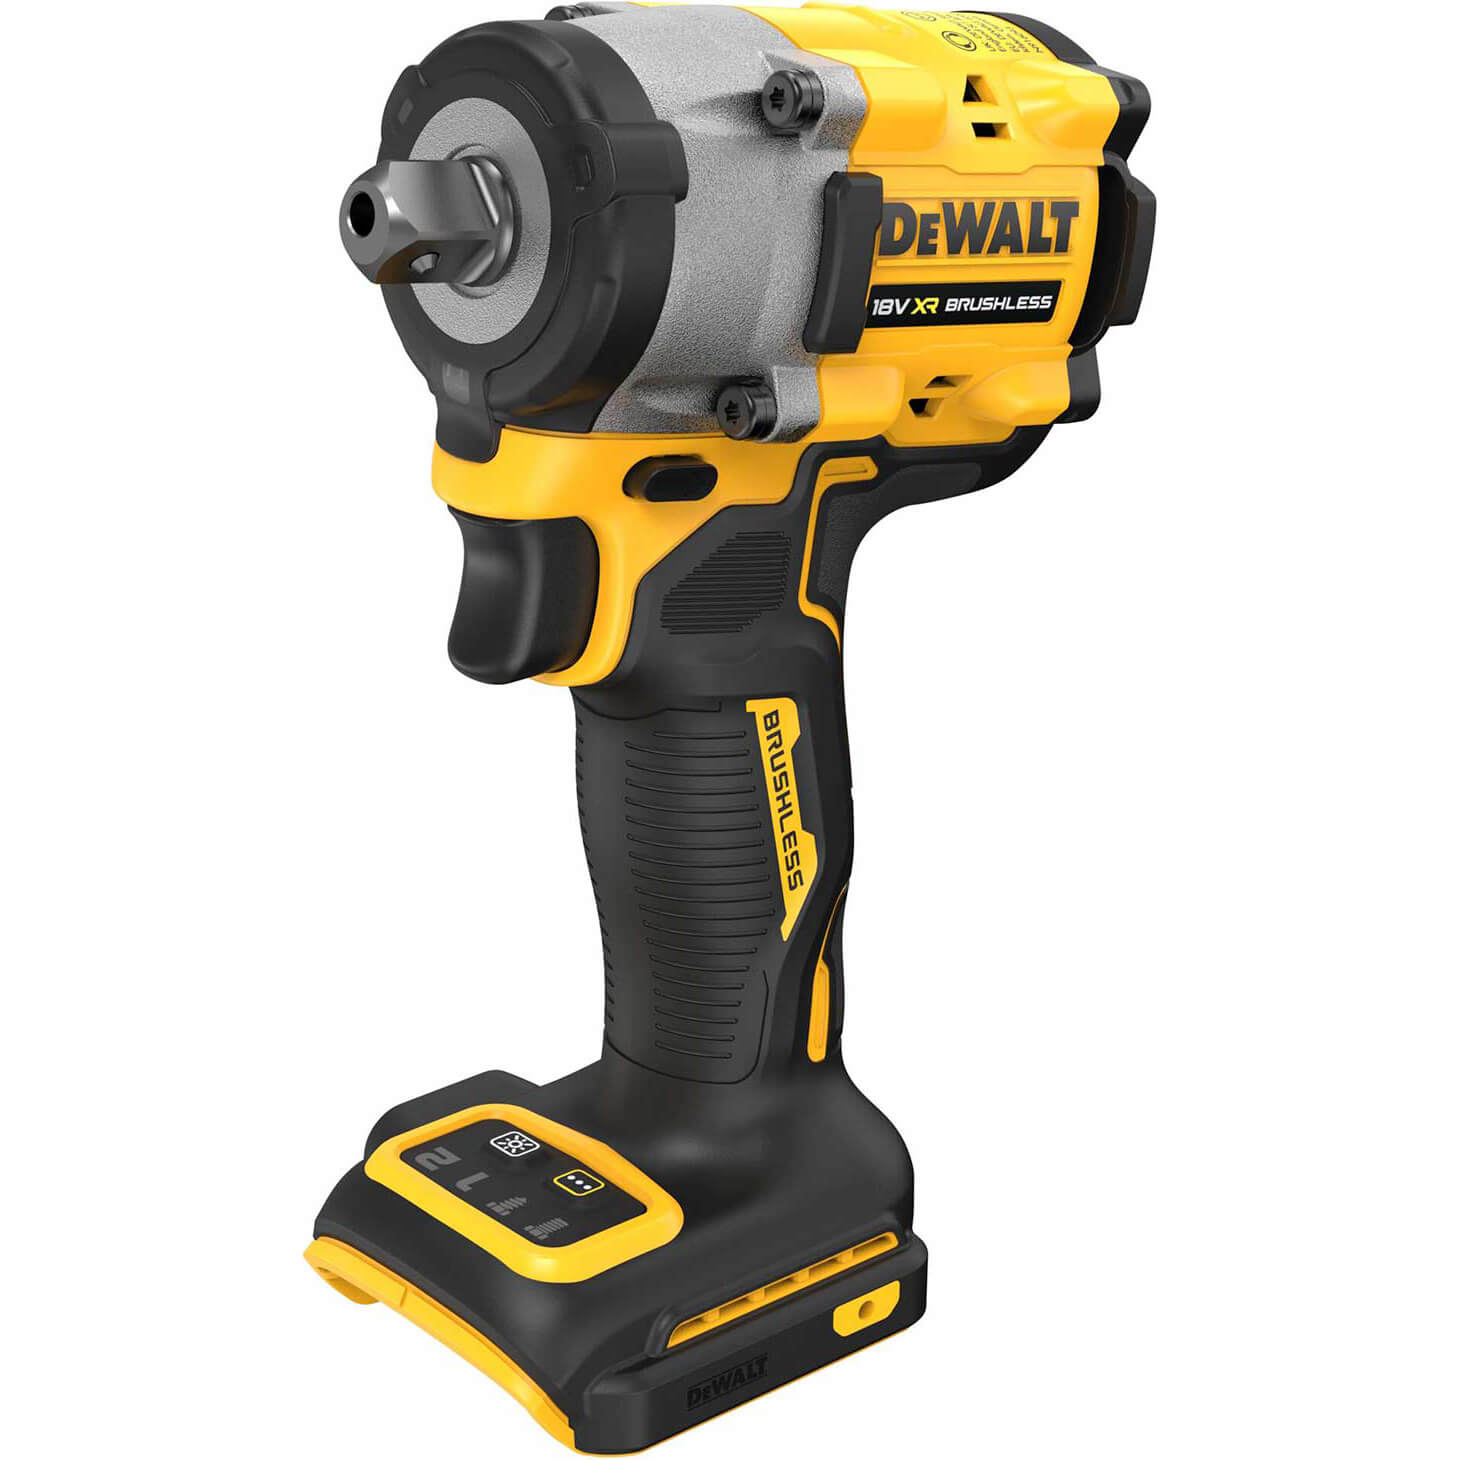 DeWalt DCF922 18v XR Cordless Brushless 1/2" Compact Impact Wrench No Batteries No Charger No Case